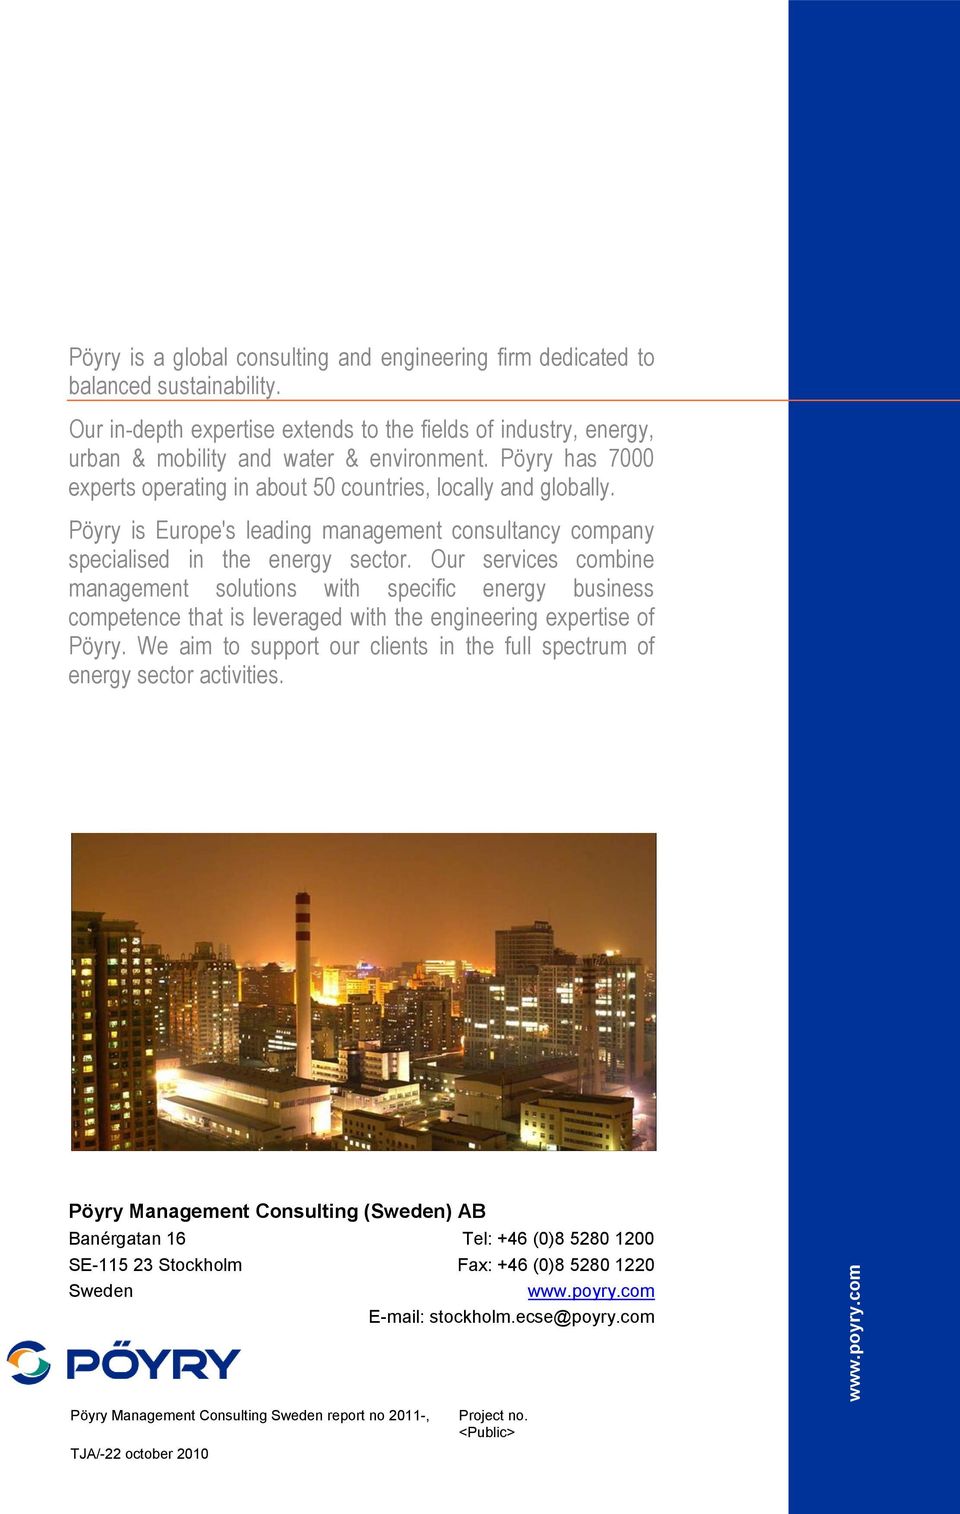 Pöyry is Europe's leading management consultancy company specialised in the energy sector.